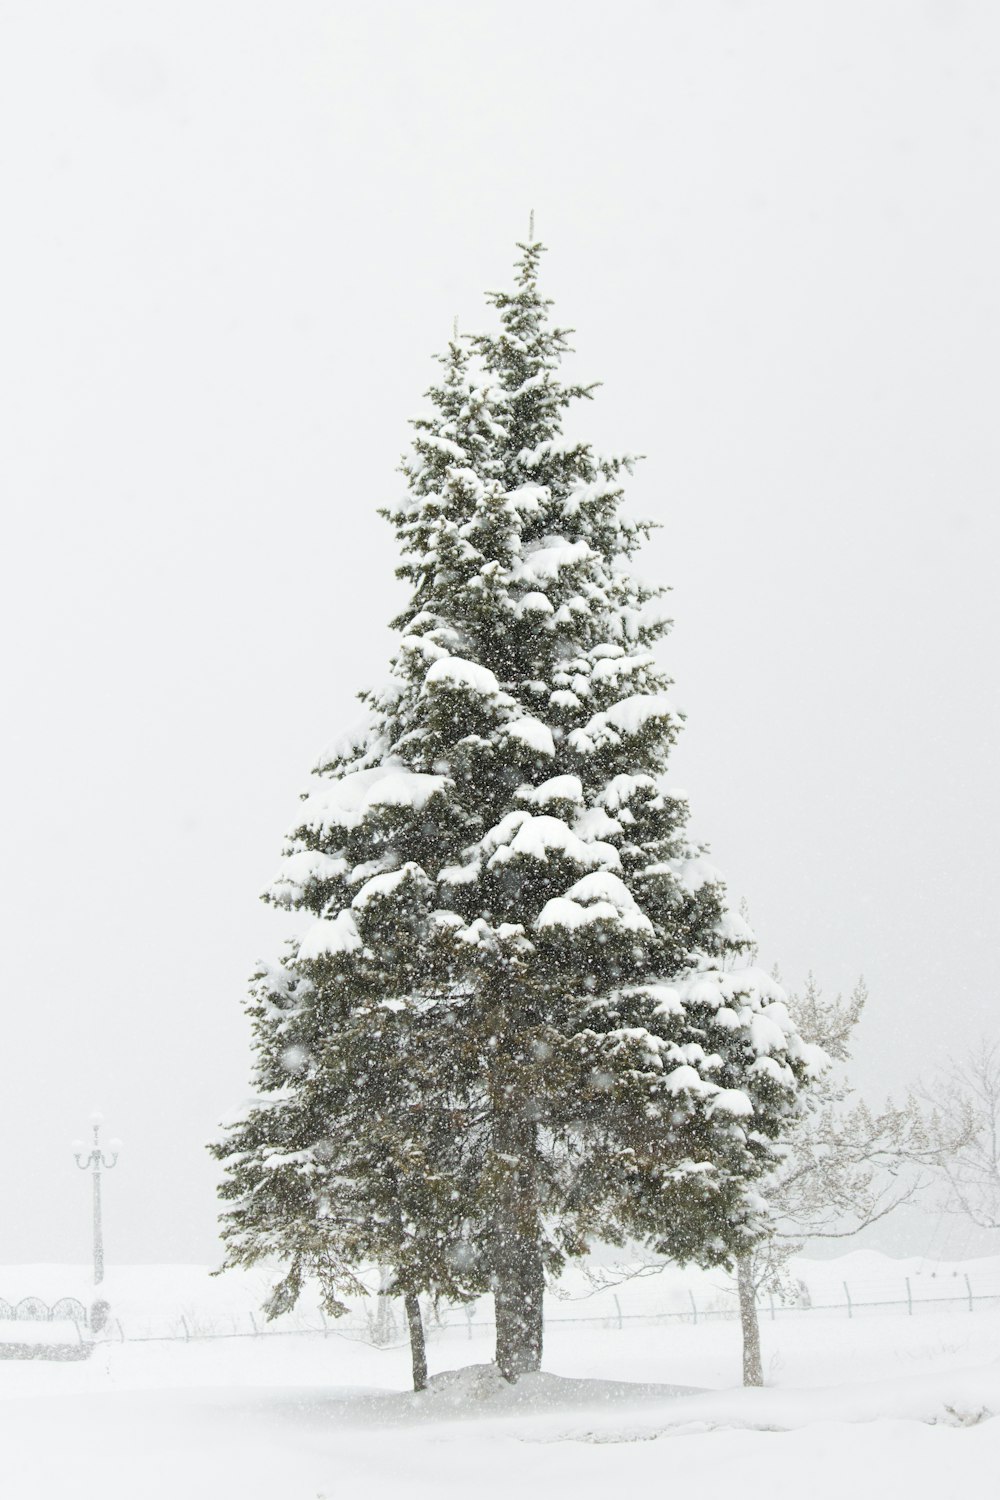 a snow covered pine tree in a snowy field